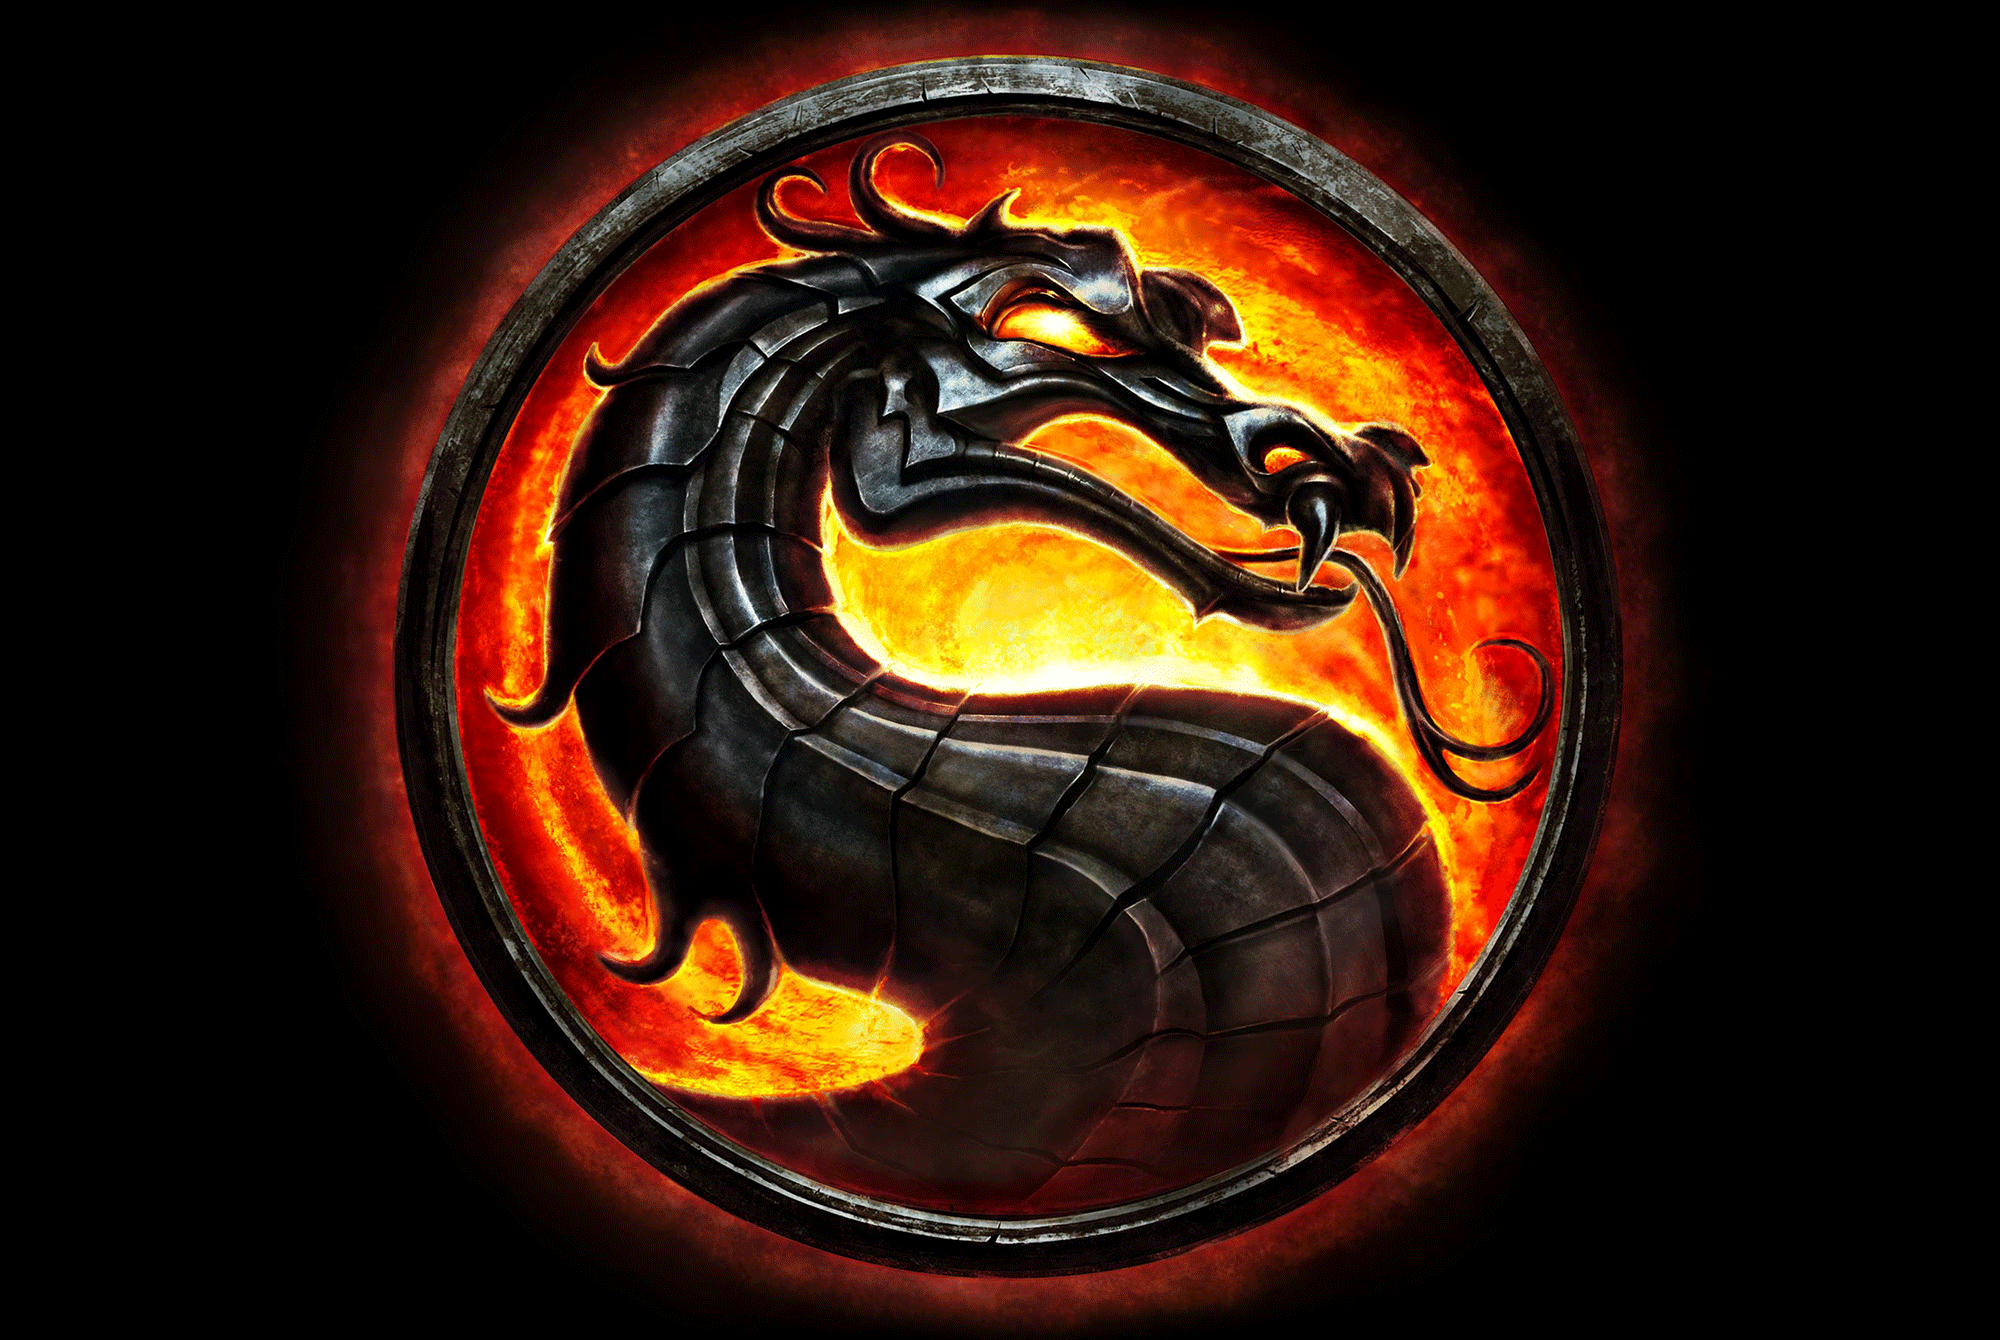 Cool Dragon Logo - Cool Dragon Logo. 223 best dragons image on in 2018